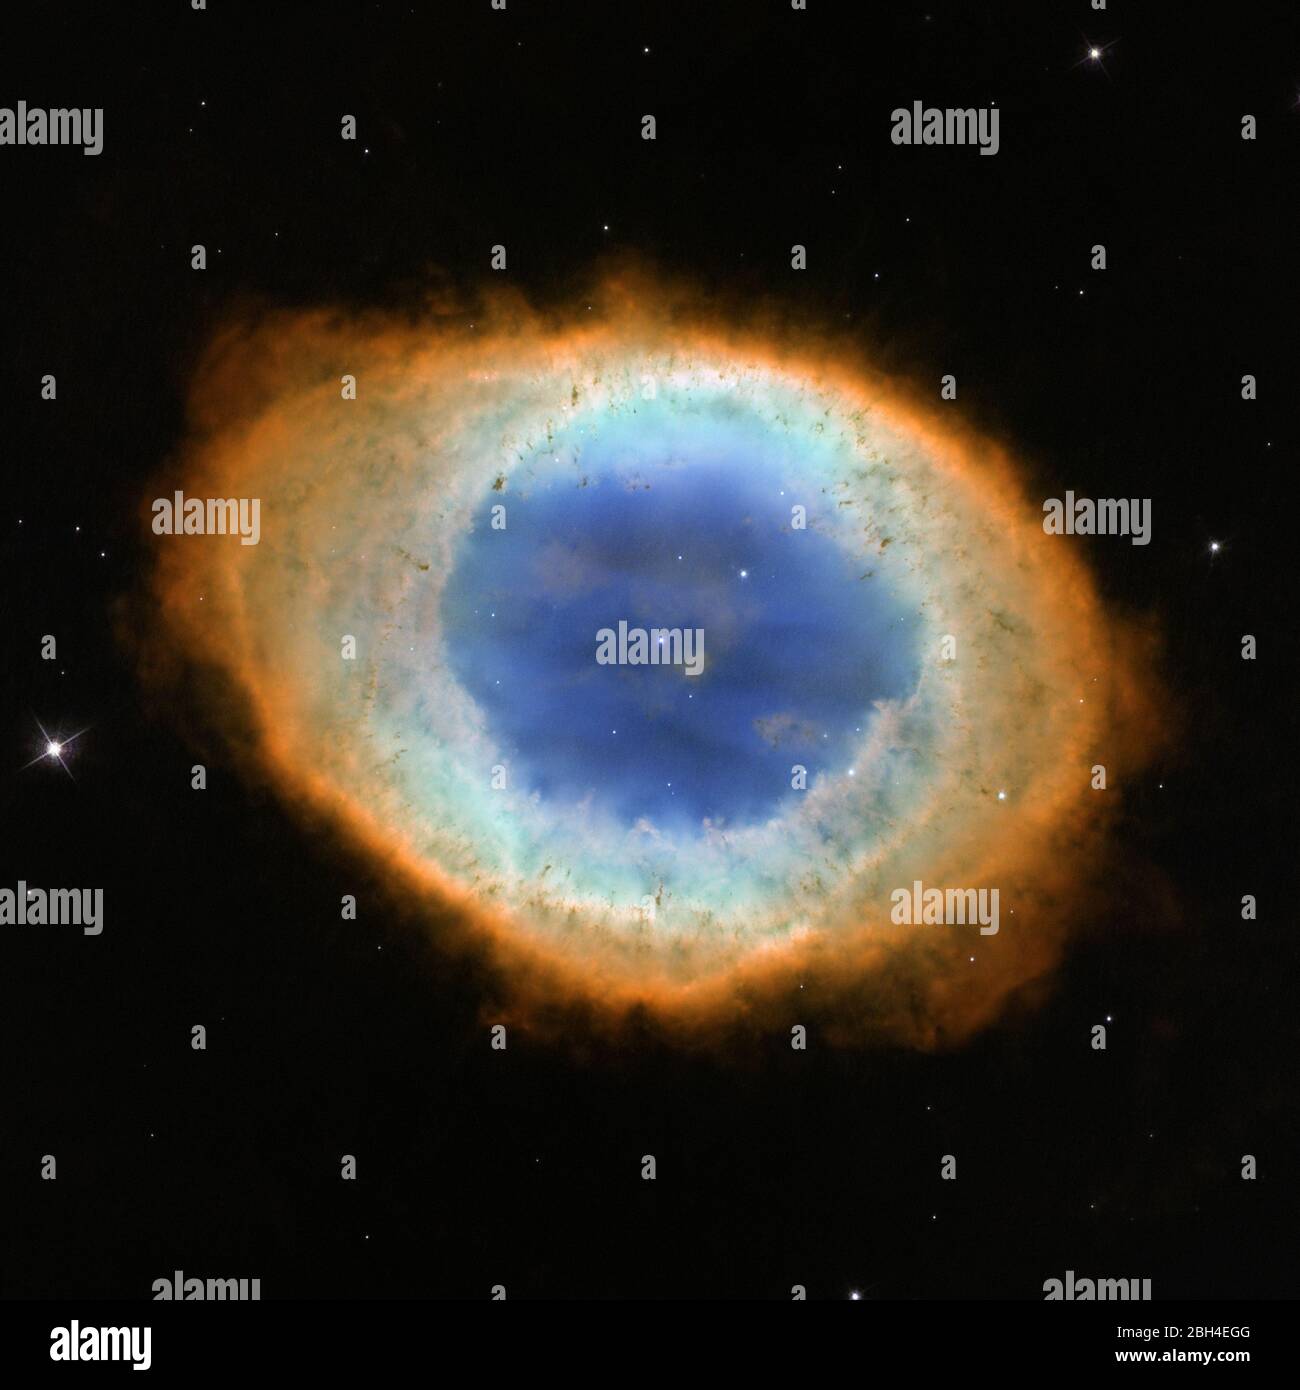 Washington, United States. 23rd Apr, 2020. This image shows the dramatic shape and color of the Ring Nebula, otherwise known as Messier 57. From Earth's perspective, the nebula looks like a simple elliptical shape with a shaggy boundary. However, observations combining existing ground-based data with new NASA/ESA Hubble Space Telescope data show that the nebula is shaped like a distorted doughnut. Stock Photo